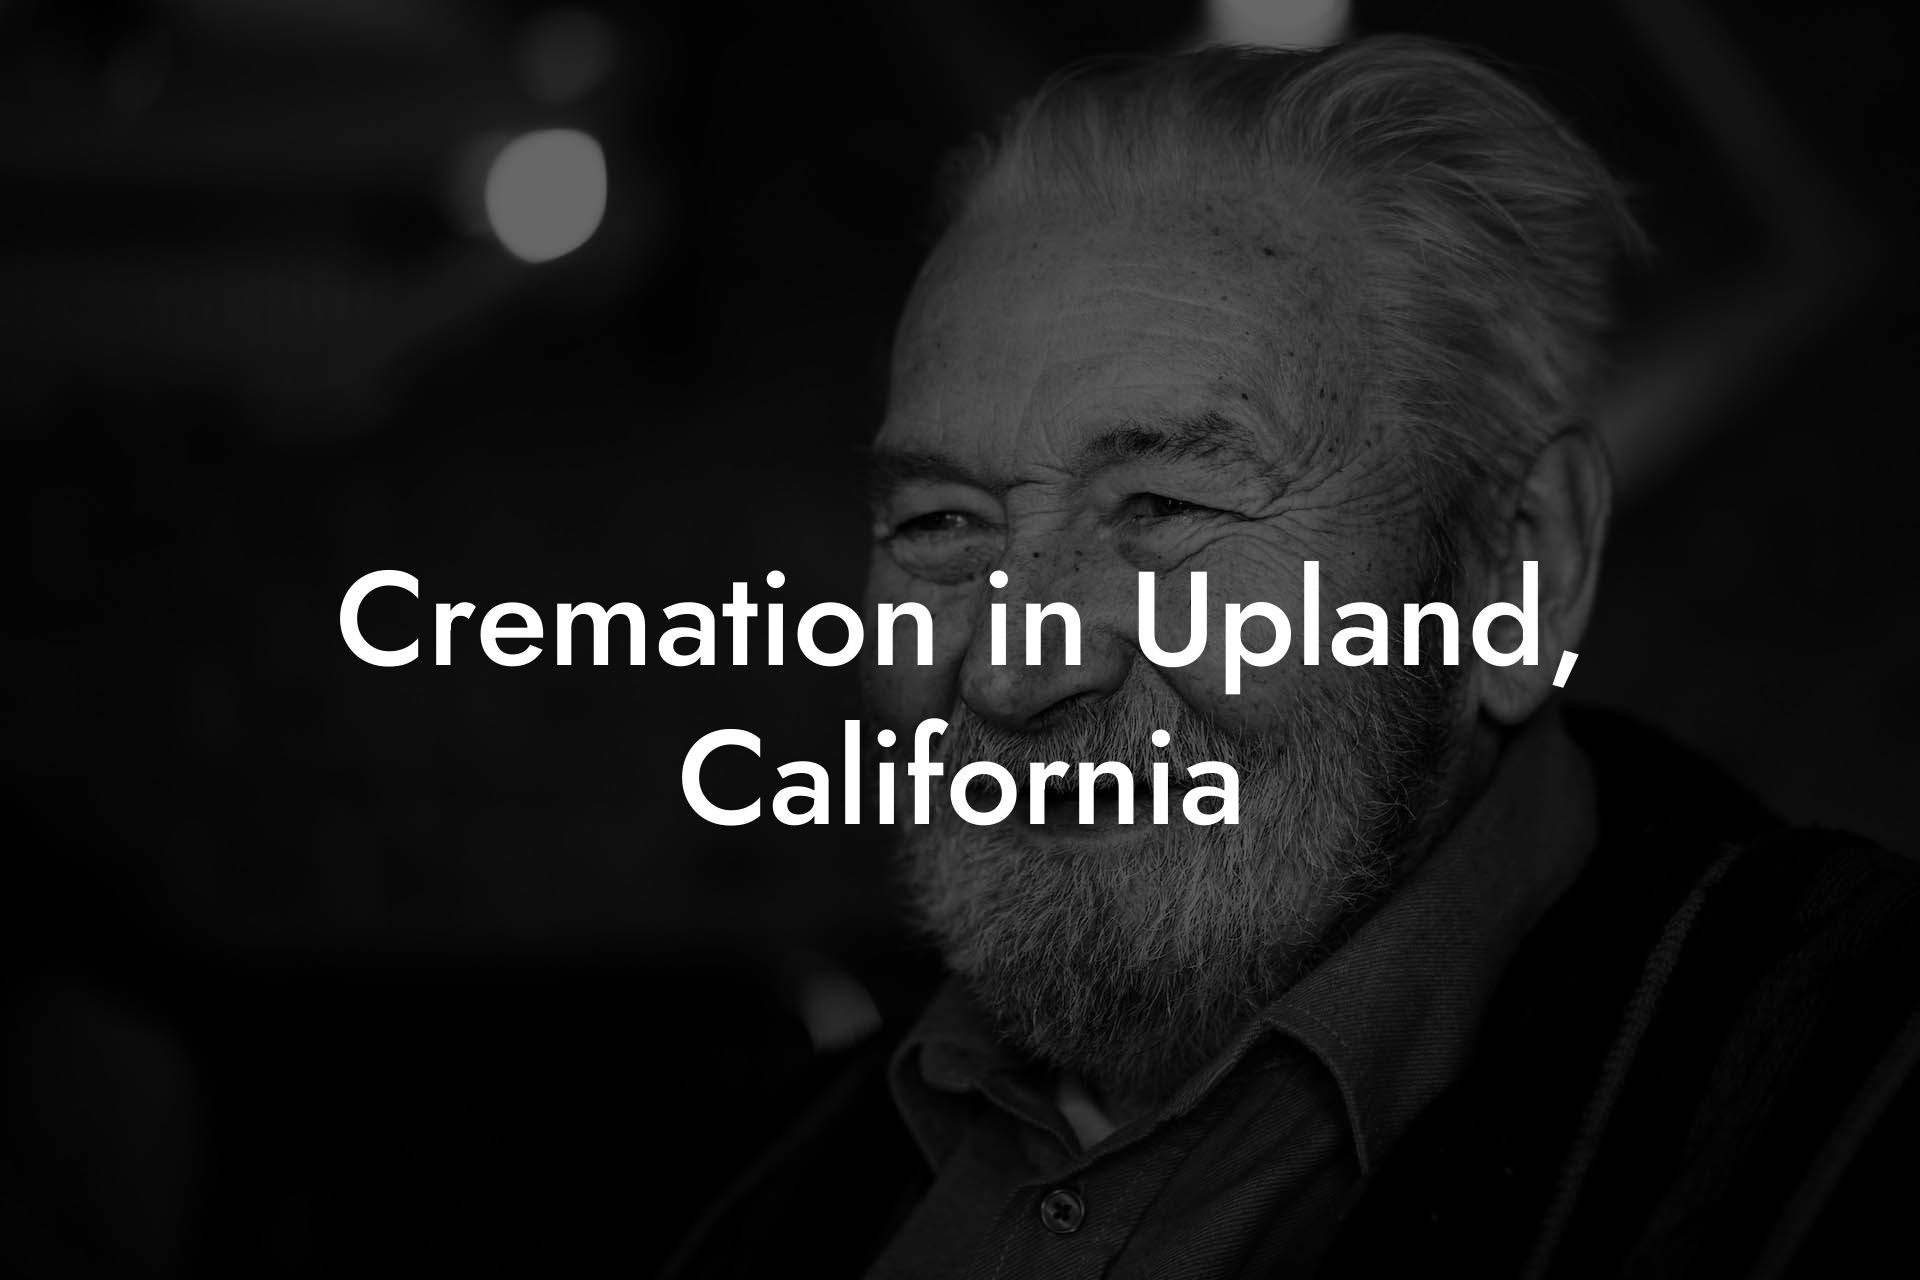 Cremation in Upland, California